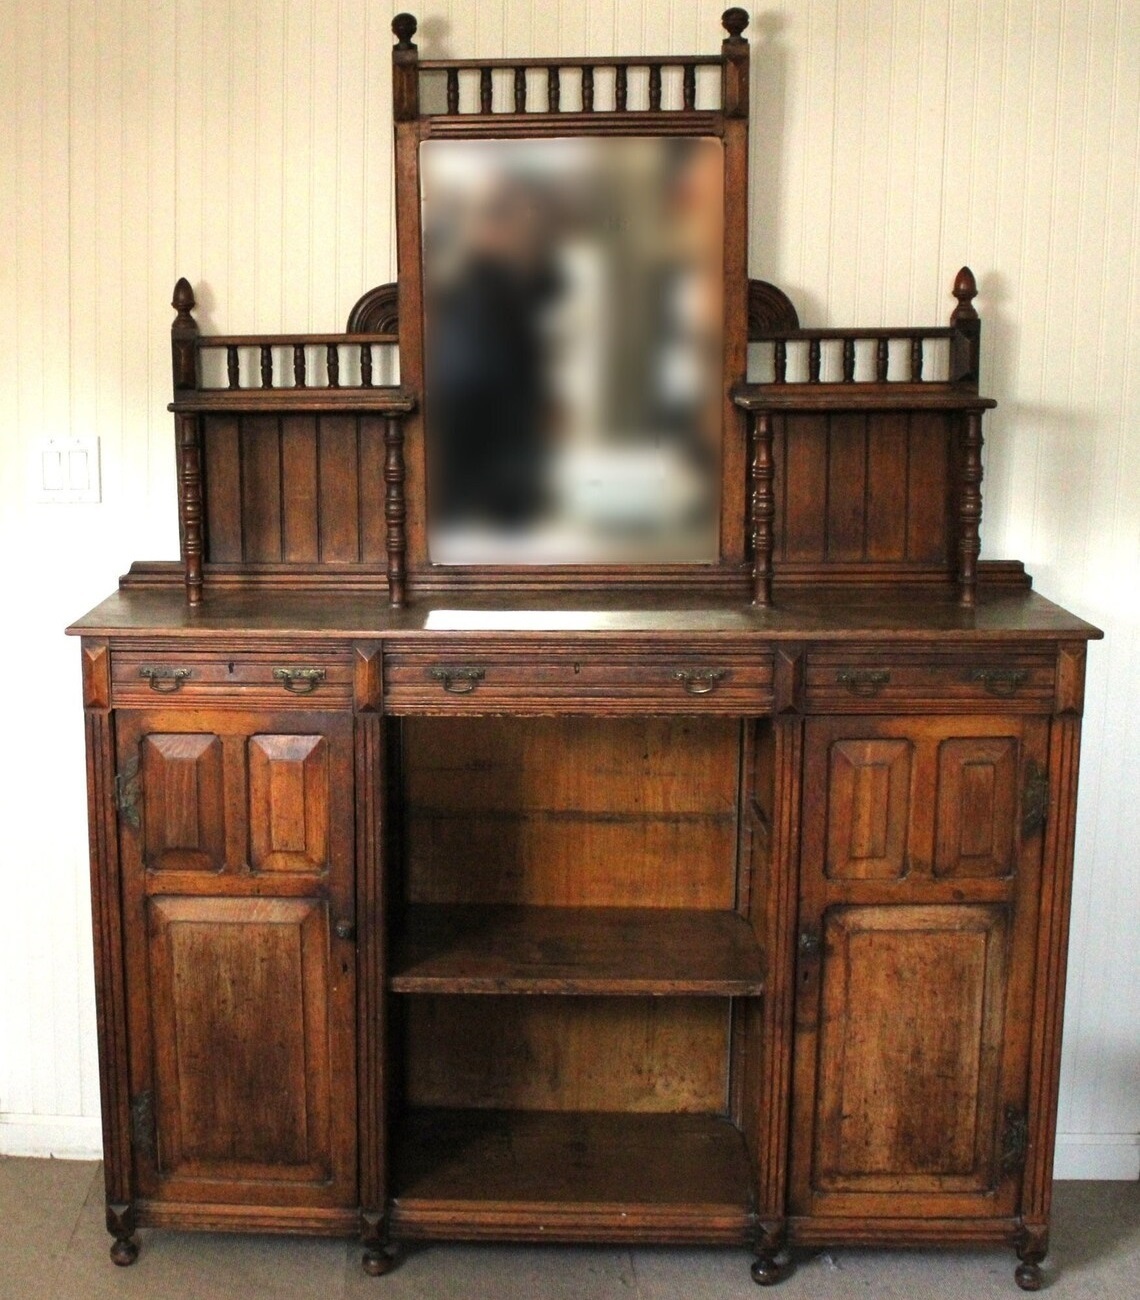 Antique Sideboard and Buffet